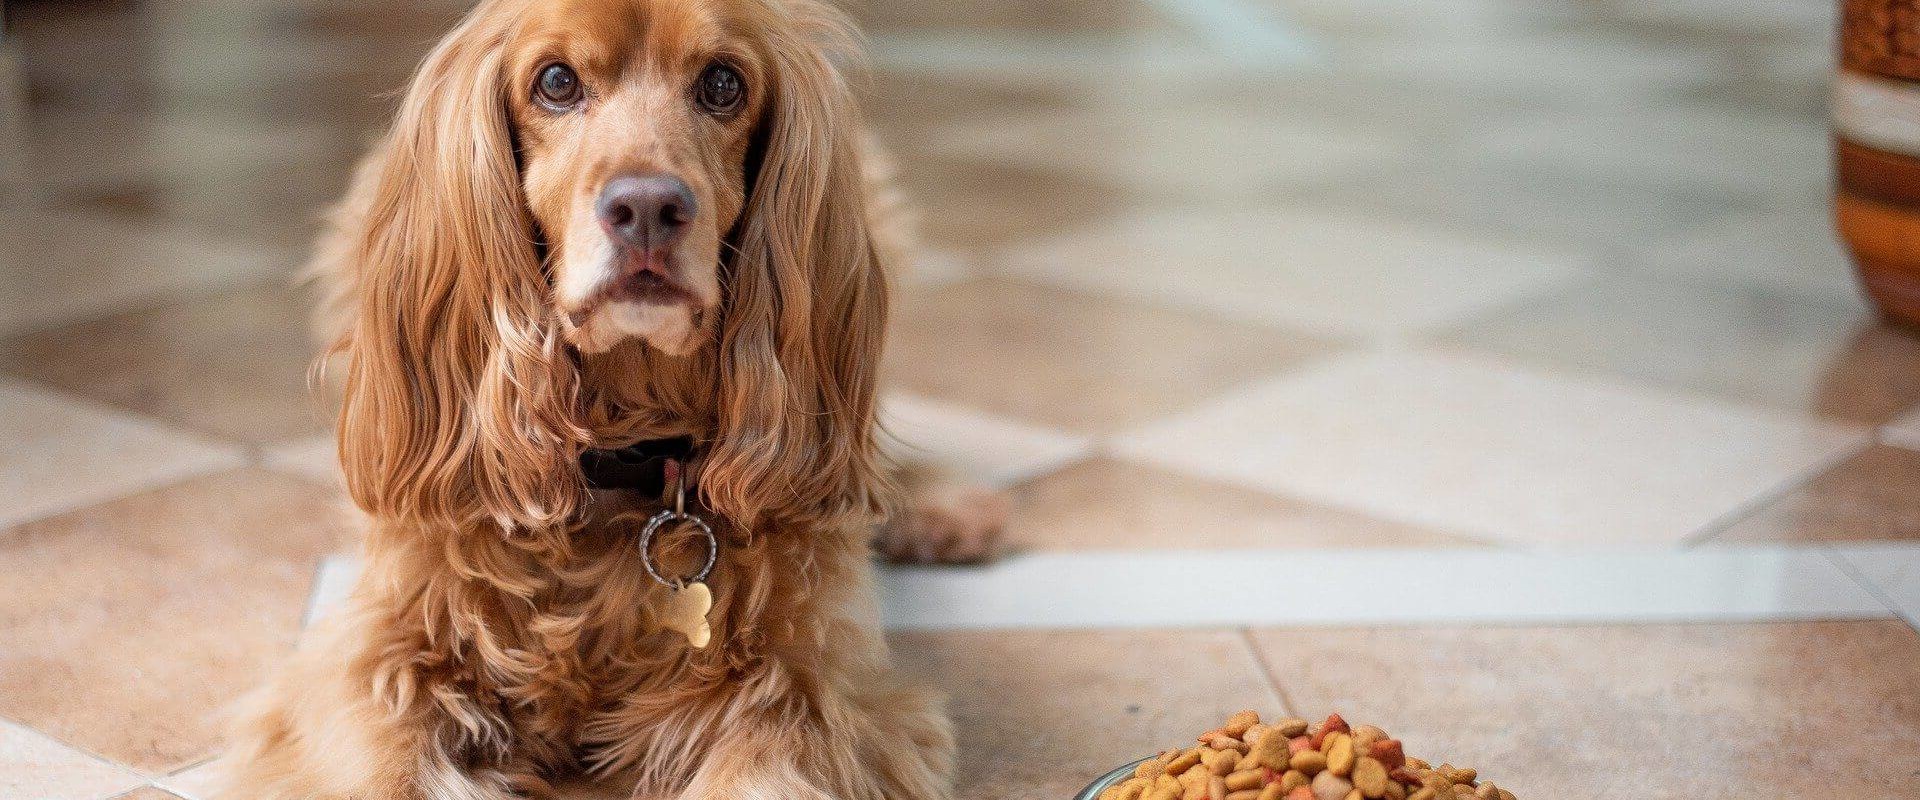 What ingredient in dog food is killing dogs?